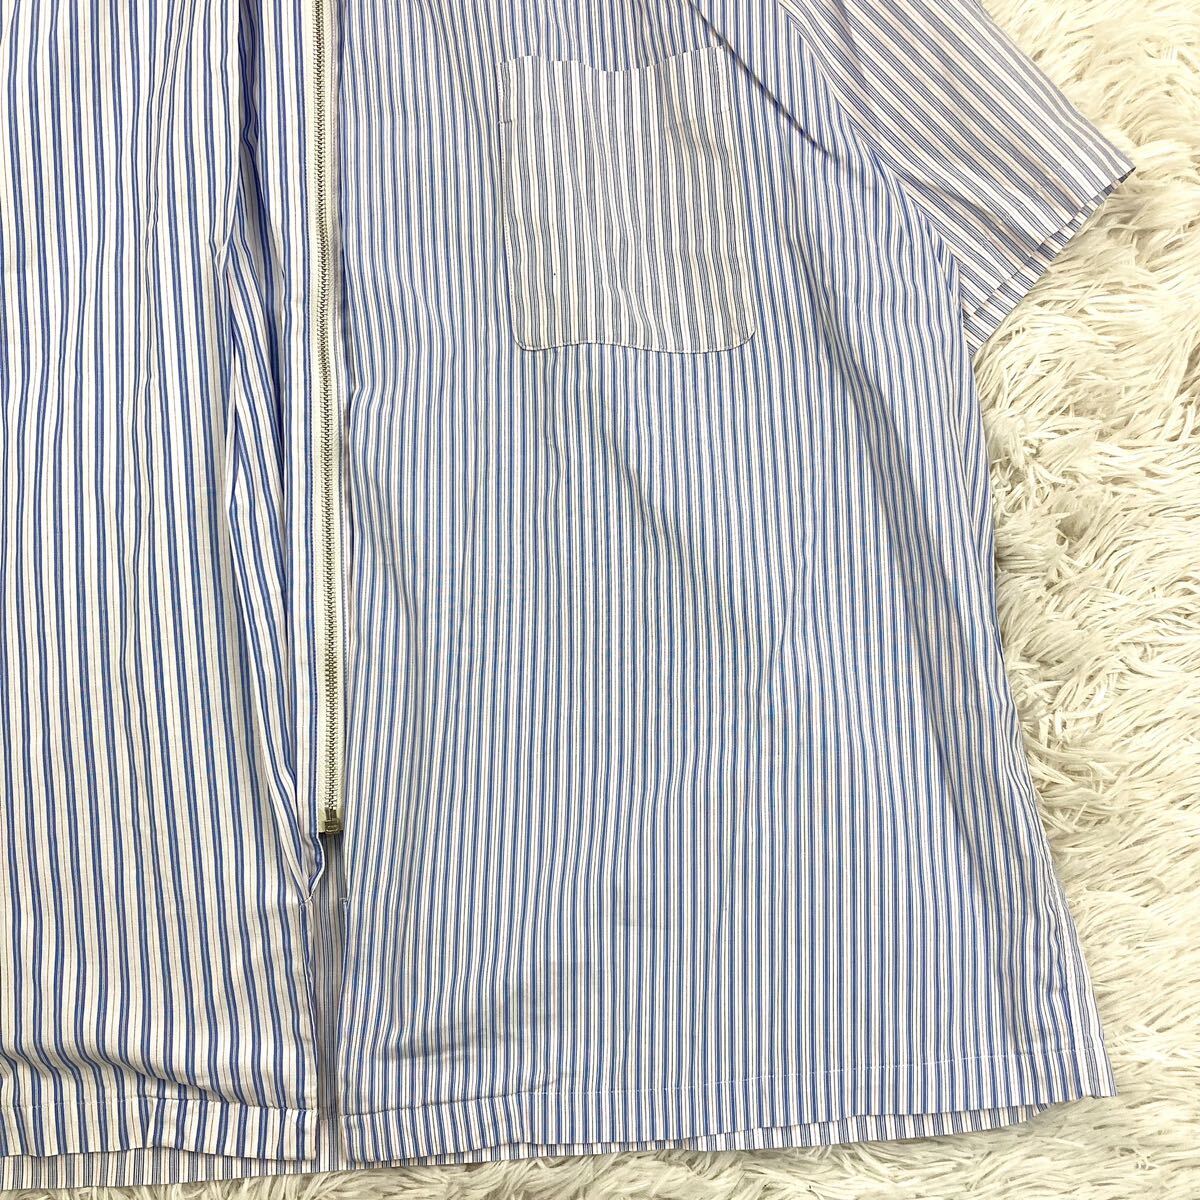  beautiful goods Comme des Garcons Homme COMME des GARCONS rice field middle Homme short sleeves shirt switch do King k Lazy Zip up stripe blue archive 